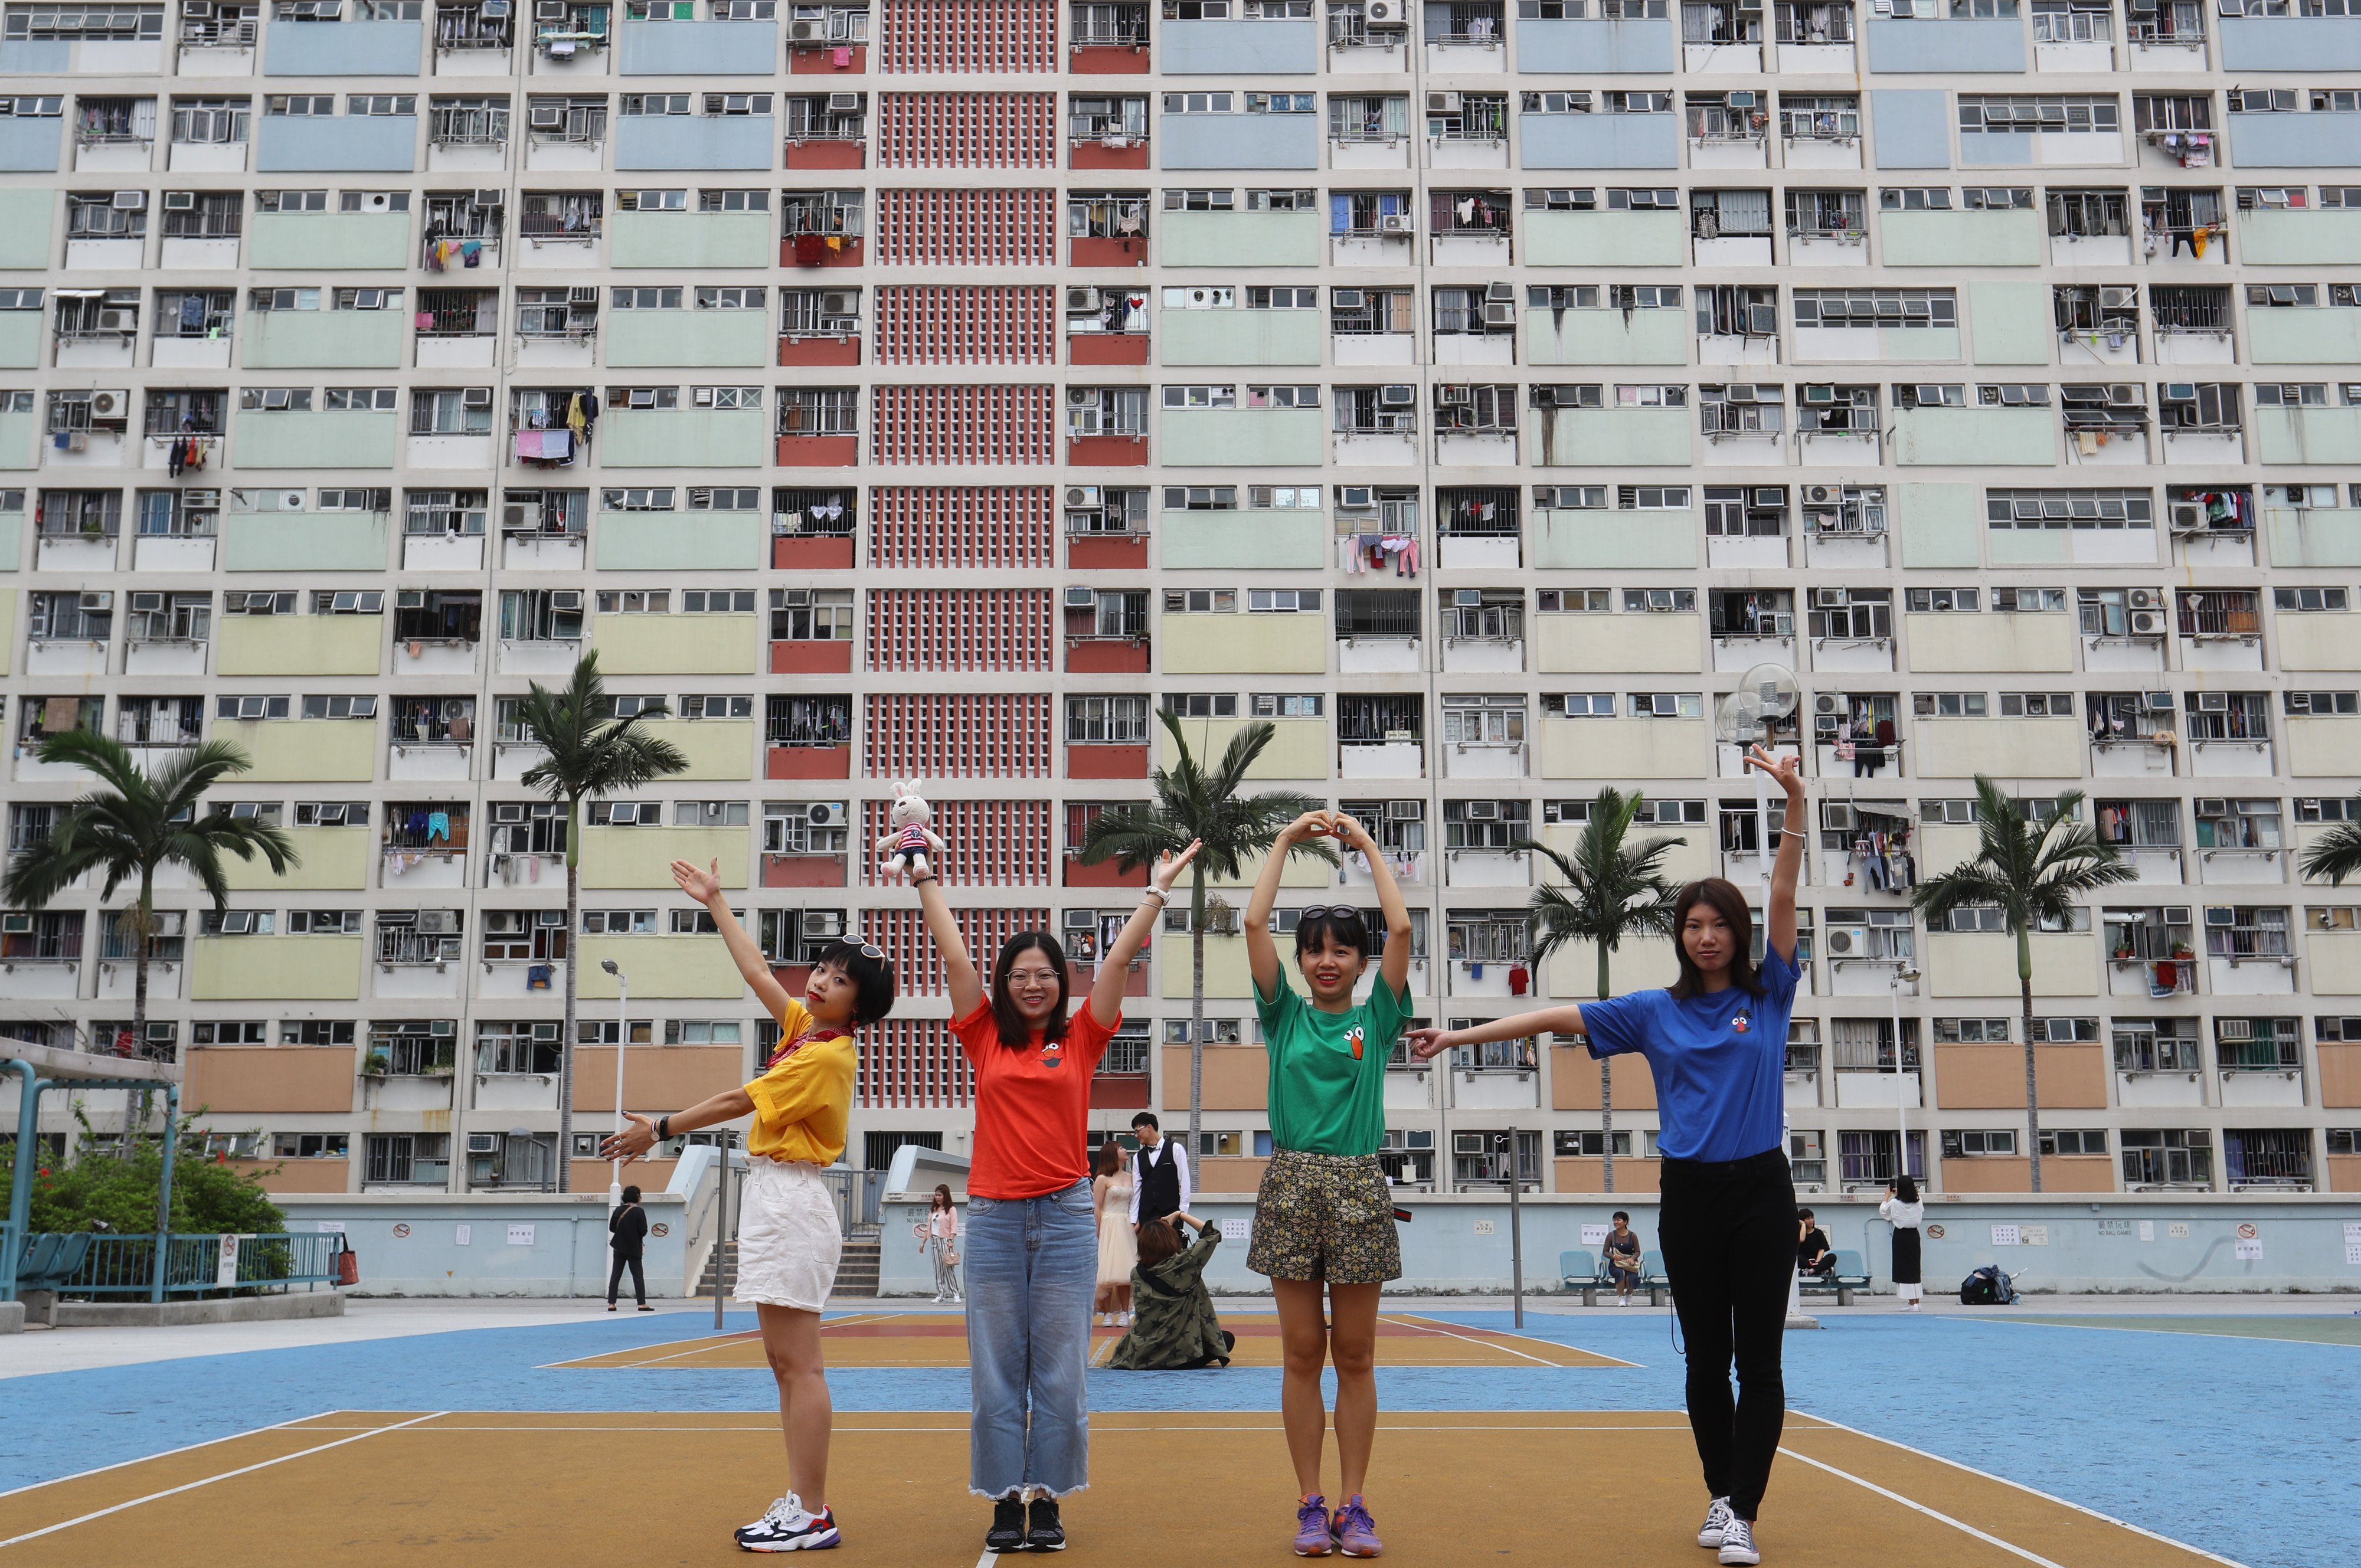 Tourists pose for photos at Choi Hung Estate, whose colourful facade has made it a selfie hotspot, on May 10, 2019. Hong Kong’s per capita living space is only 172 sq ft. Photo: Edmond So